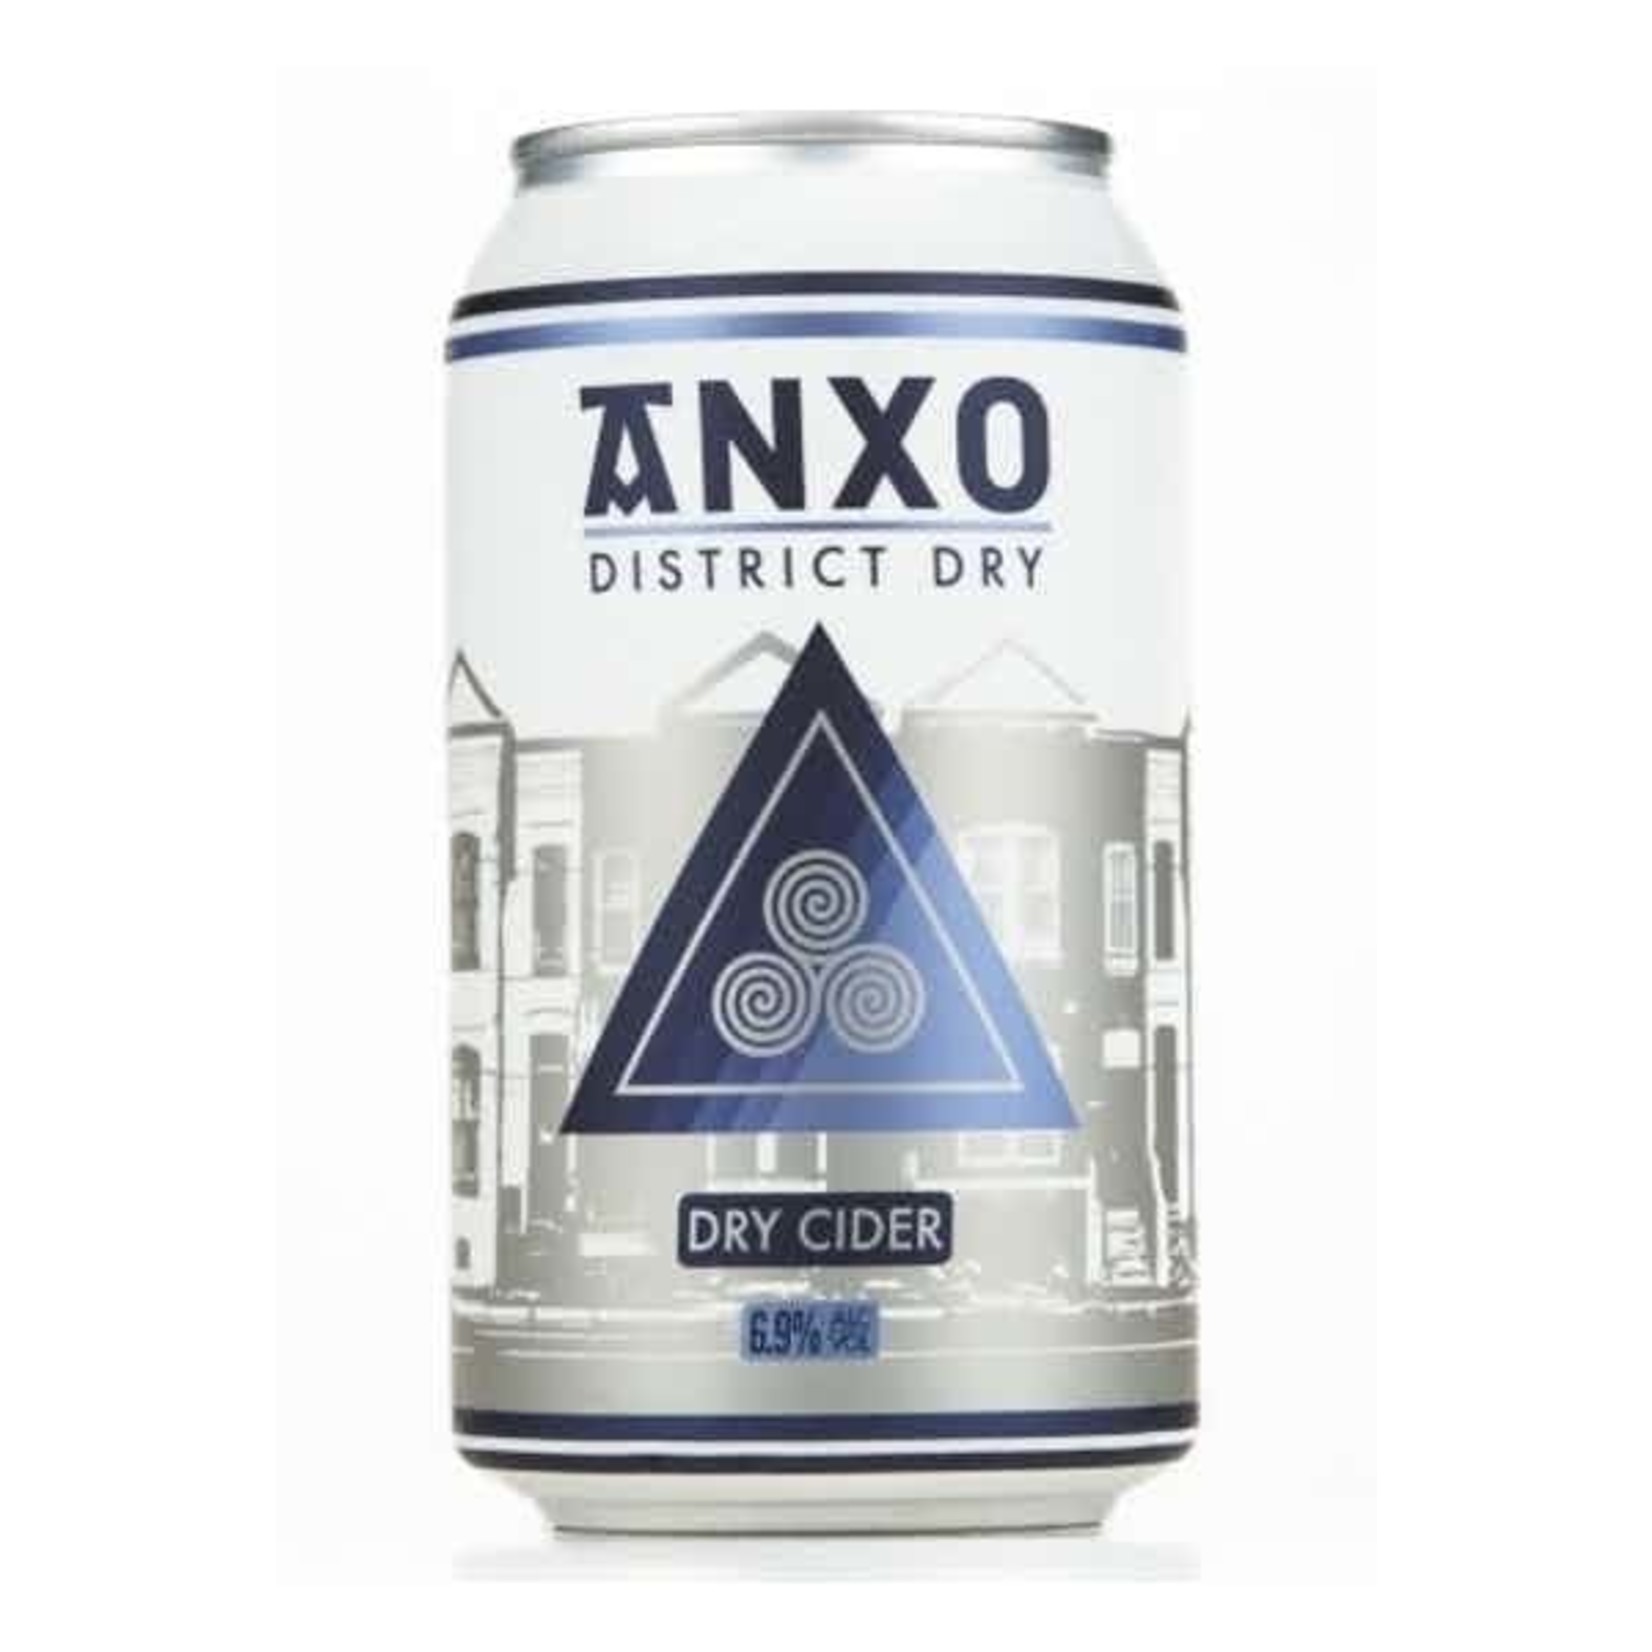 Anxo Anxo Dry Cider (District Dry)